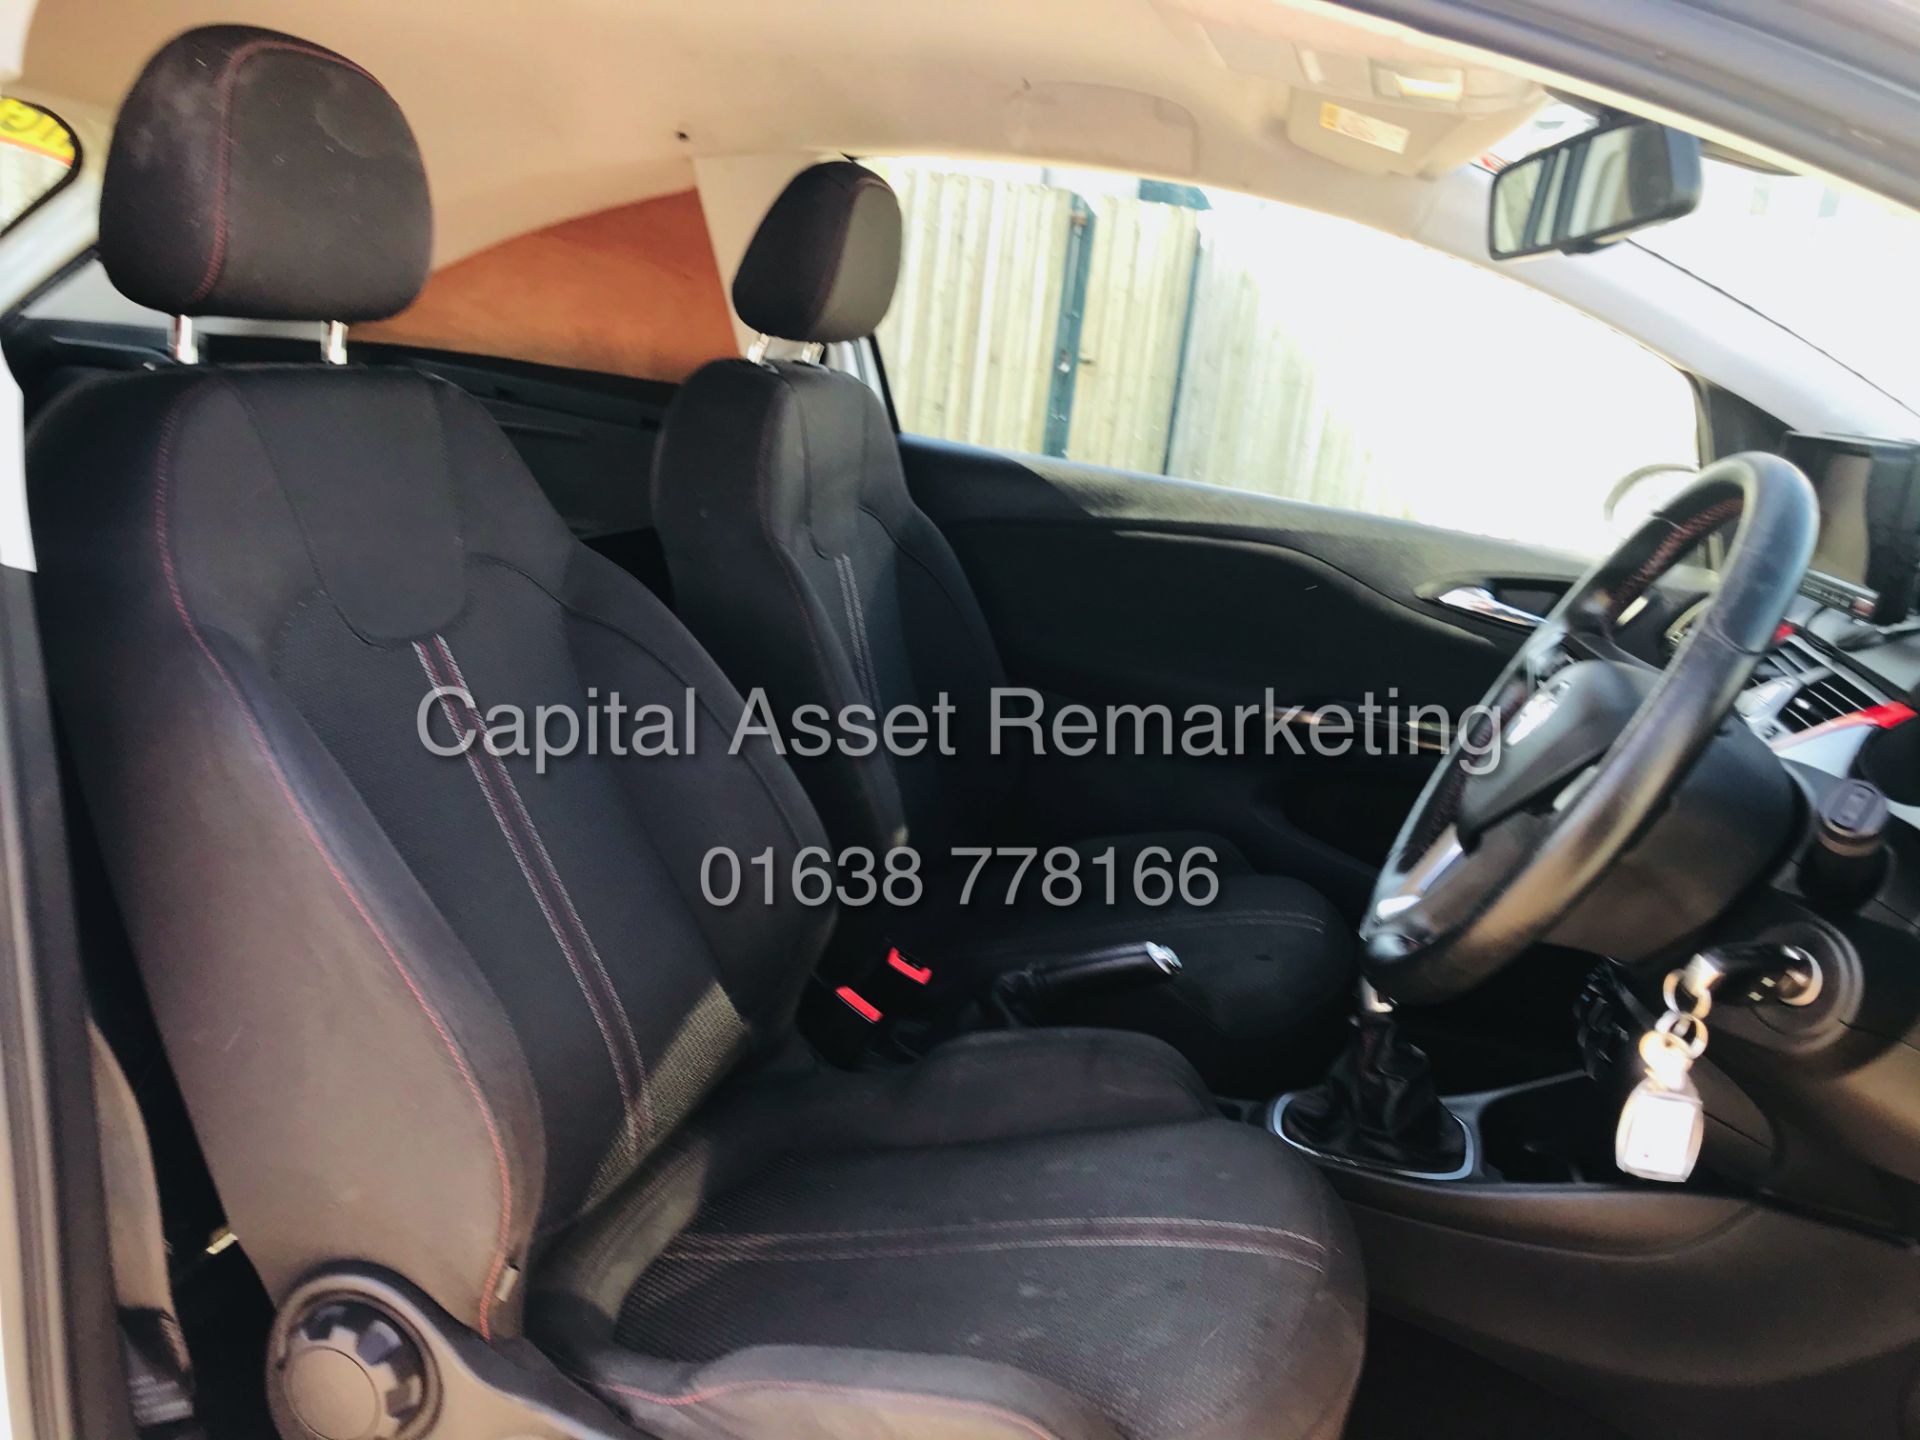 VAUXHALL CORSA 1.3CDTI "SPORTIVE" VAN (2017 MODEL) 1 OWNER FSH - LOW MILES - AIR CON -ALLOYS -EURO 6 - Image 16 of 33